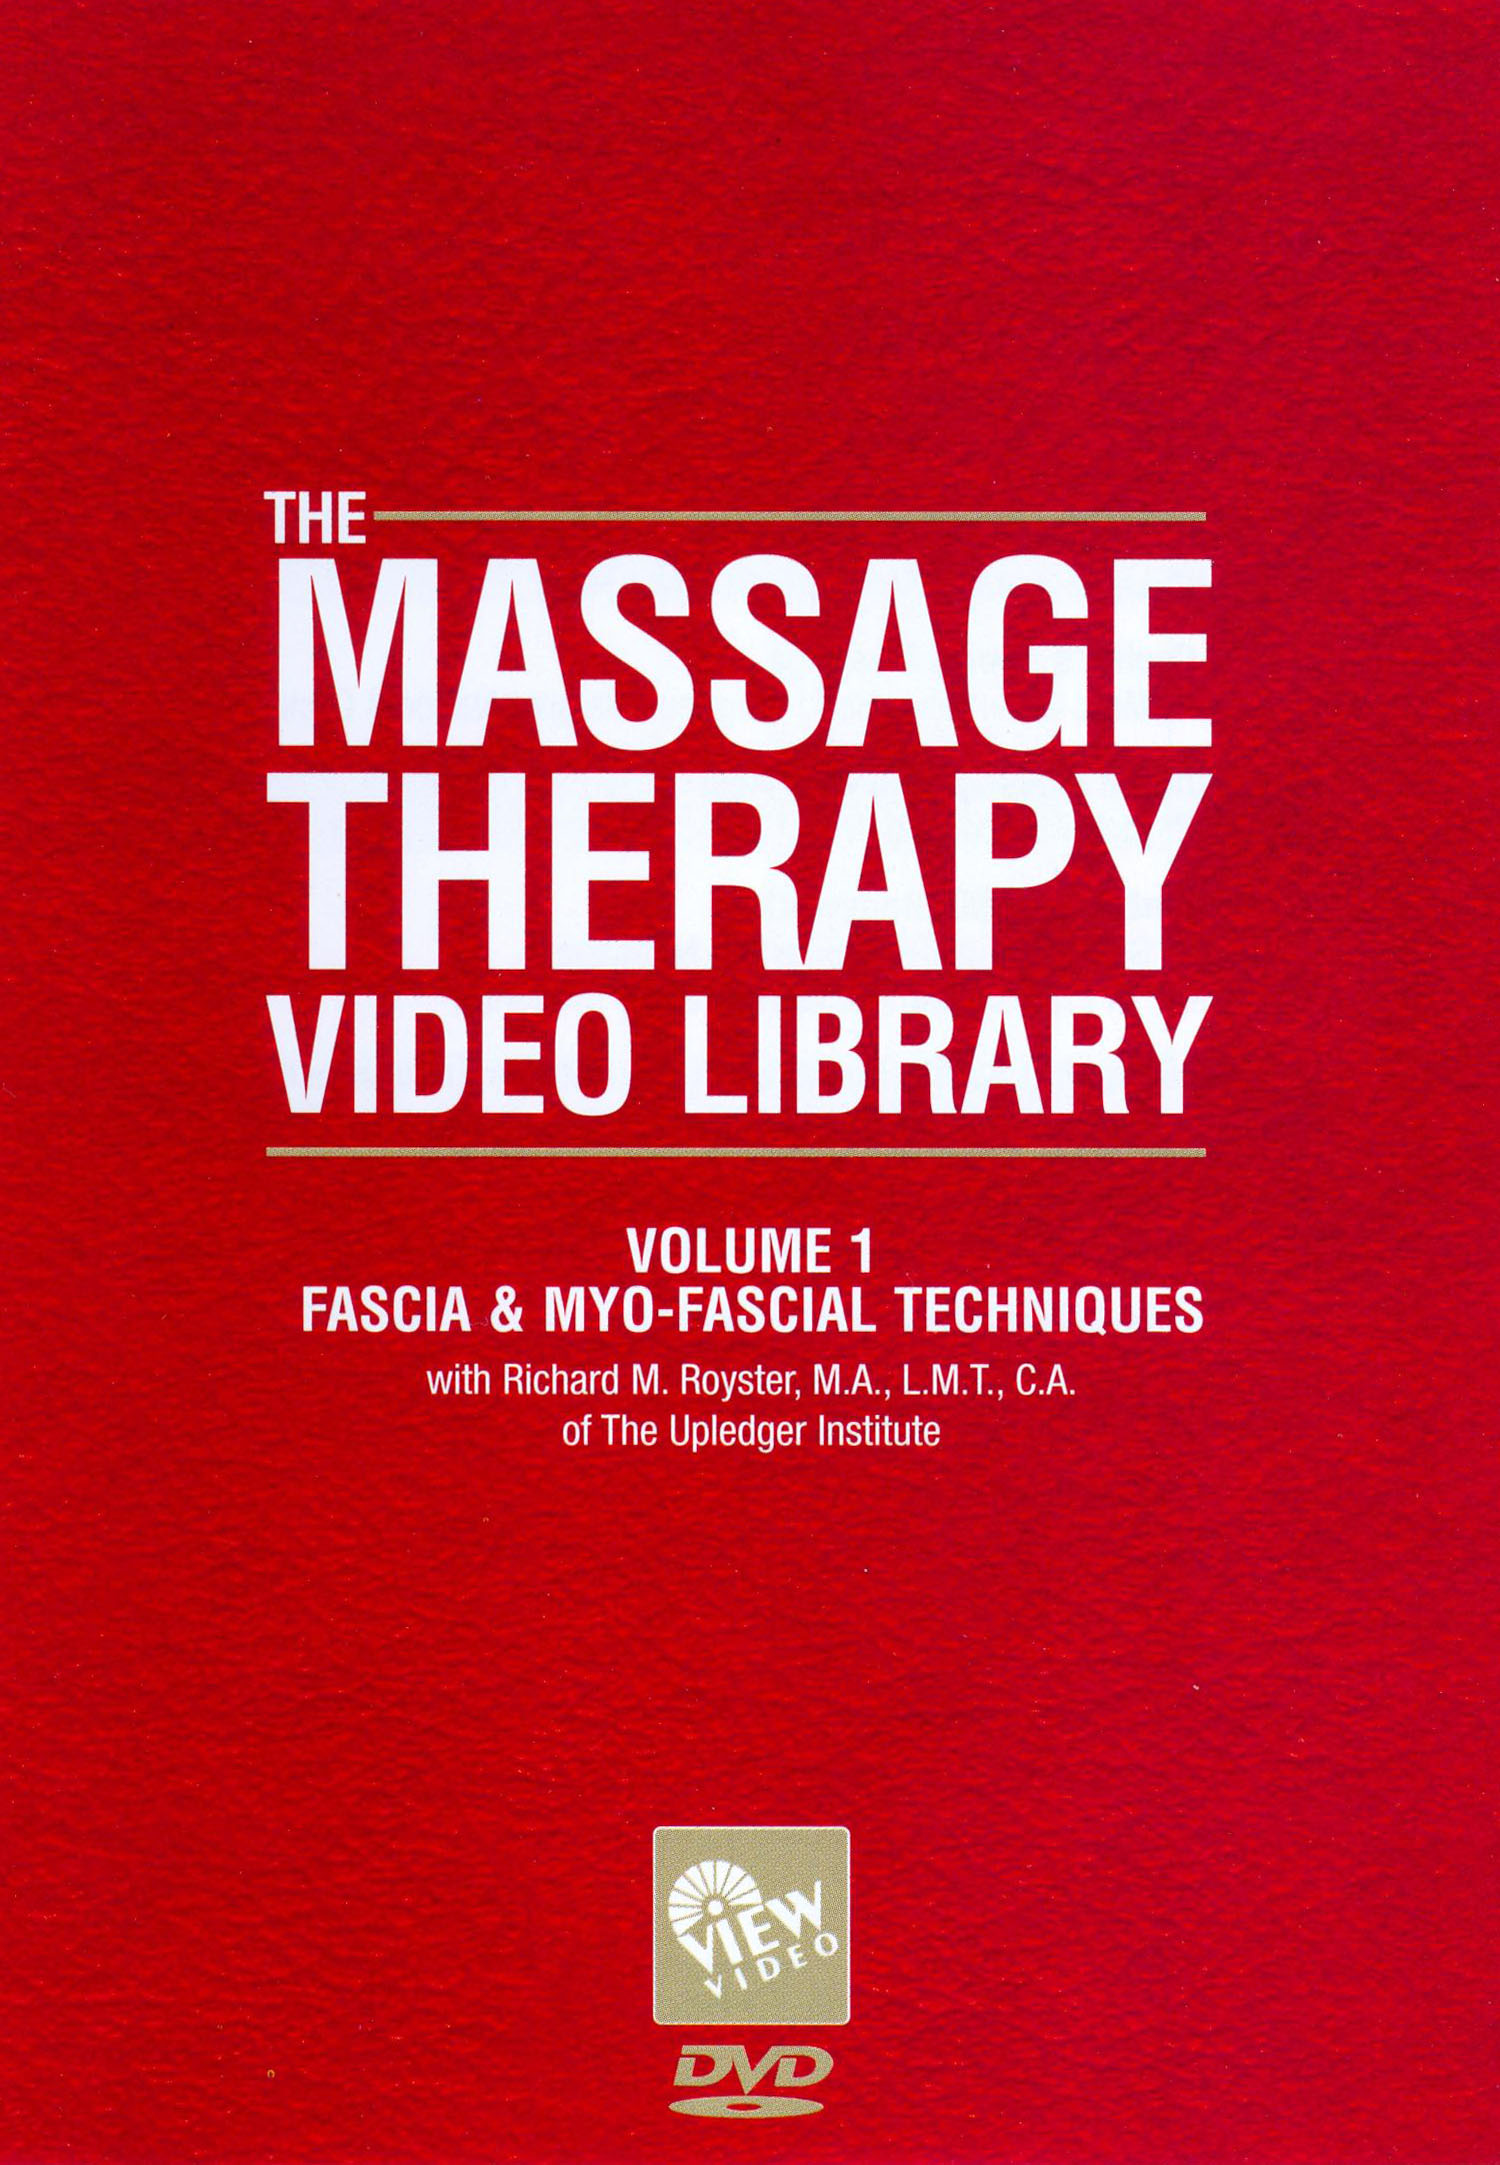 The Massage Therapy Video Library, Vol. 1: Fascia and Myo-Fascial Techniques [DVD]